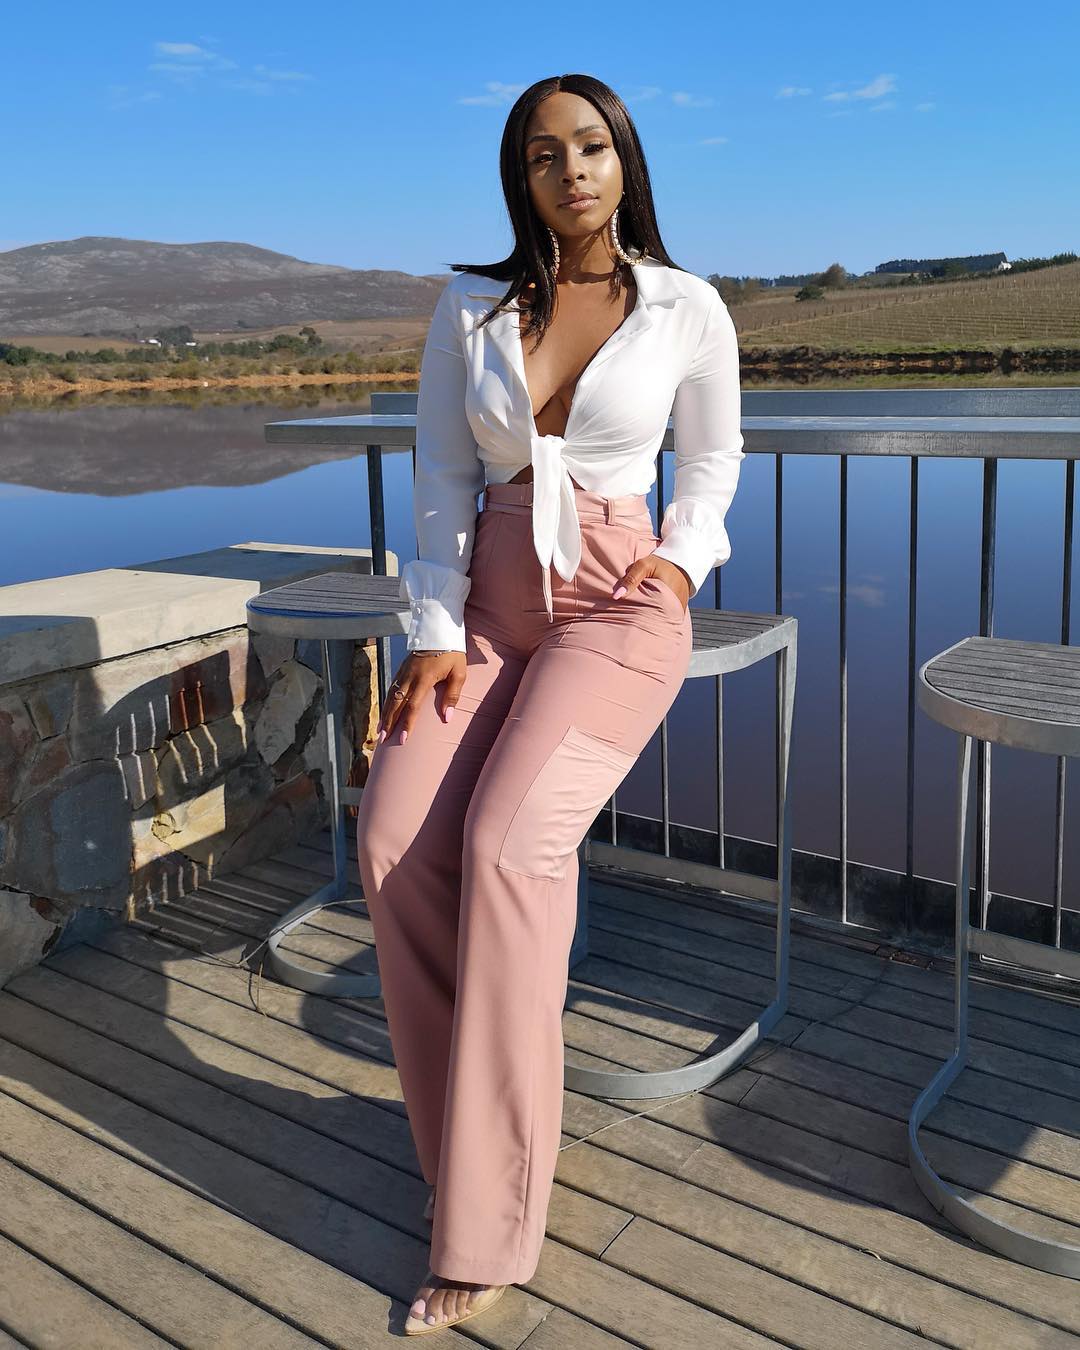 Sneak Peek: Here’s Your First Look At Boity’s New Collection With Sissy Boy #BXSB